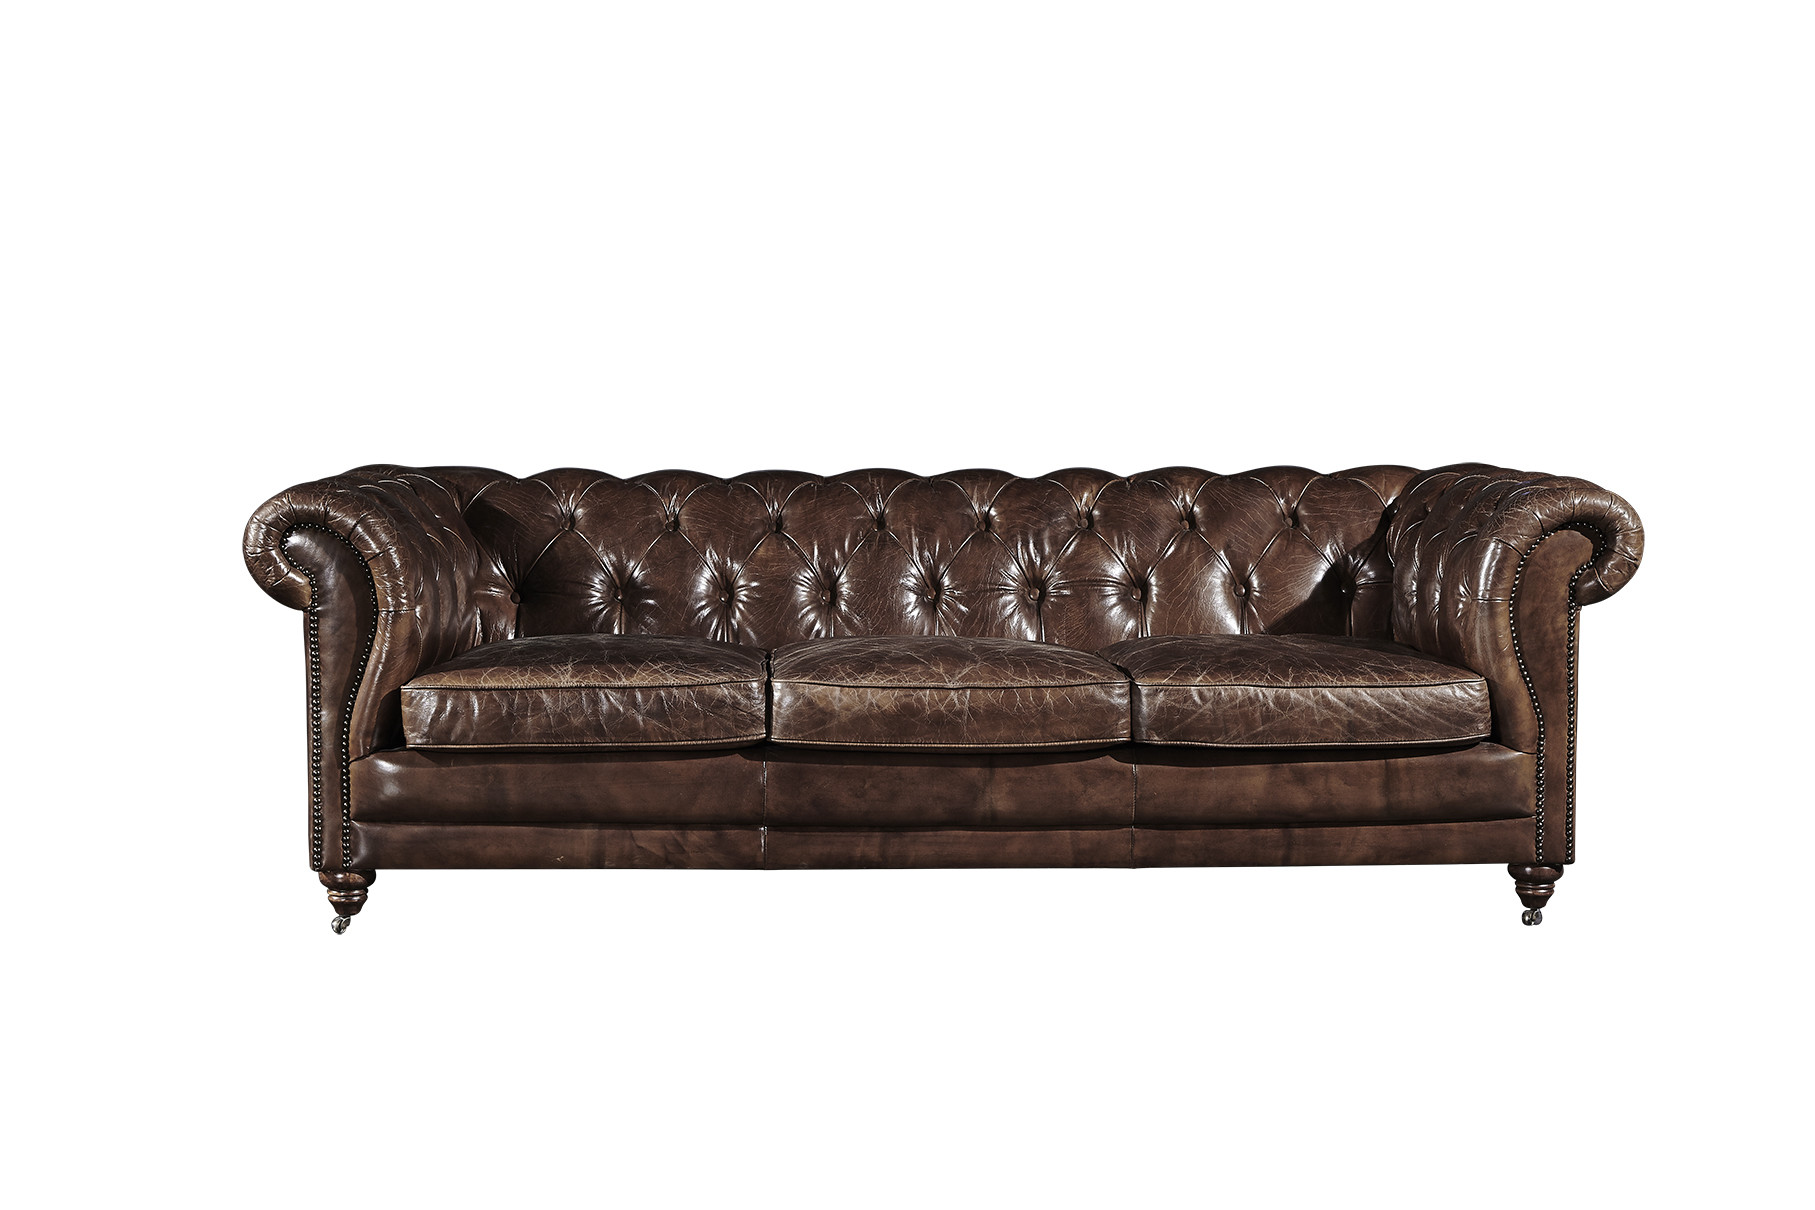 Full Handwork Vintage Cigar Leather Three Seater Chesterfield Sofa With Deep Buttons